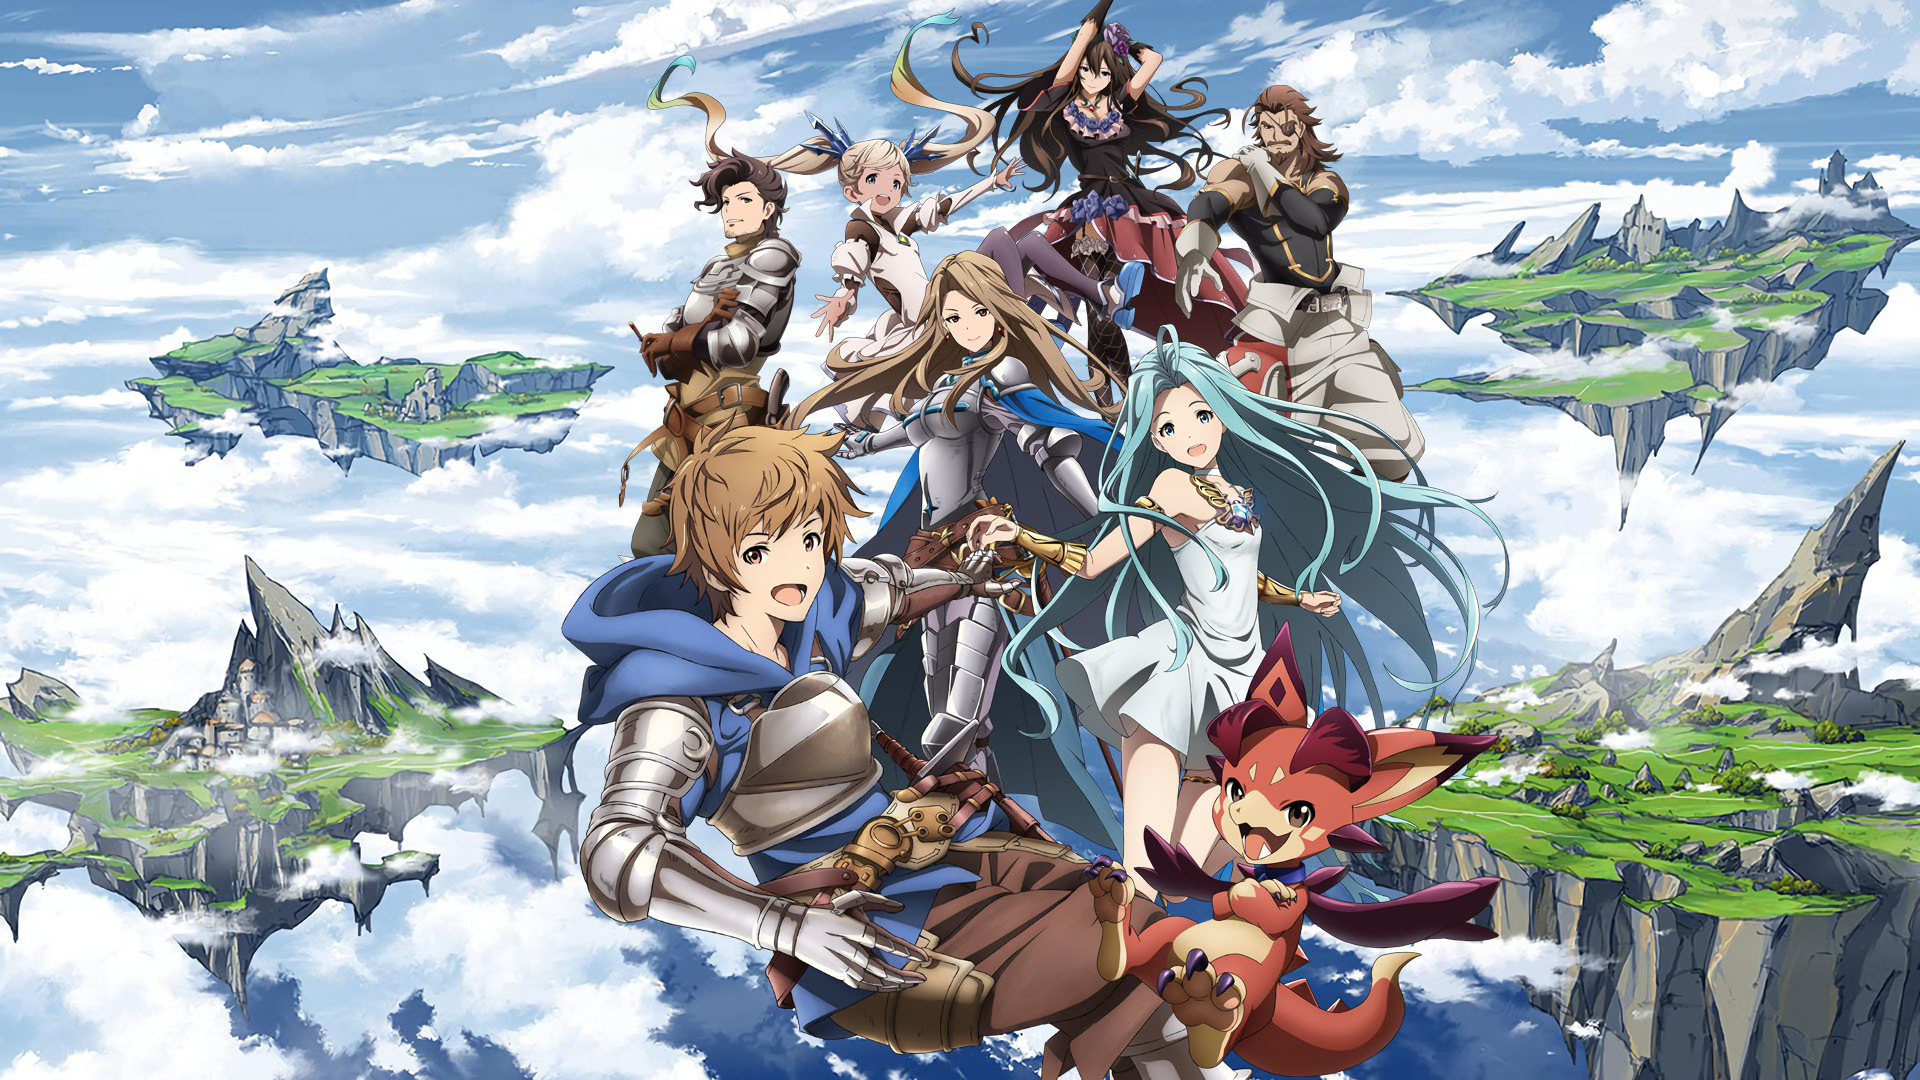 Granblue Fantasy - The Animation Wallpaper by AB-77 on DeviantArt